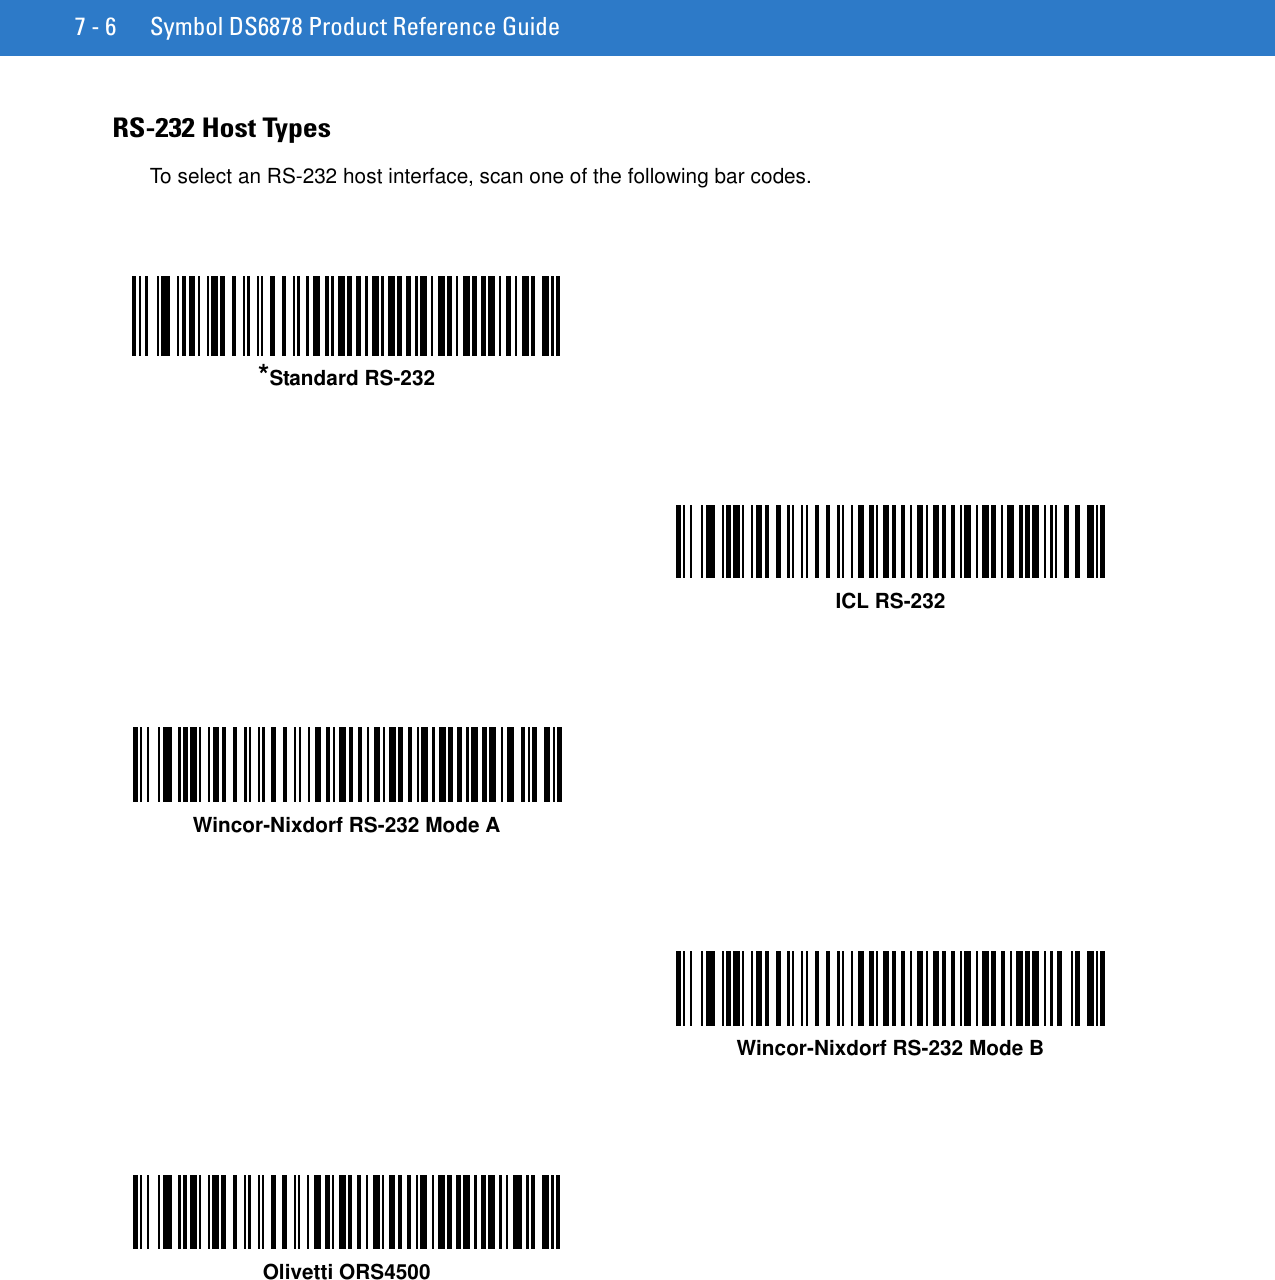 7 - 6 Symbol DS6878 Product Reference GuideRS-232 Host TypesTo select an RS-232 host interface, scan one of the following bar codes.*Standard RS-232ICL RS-232Wincor-Nixdorf RS-232 Mode AWincor-Nixdorf RS-232 Mode BOlivetti ORS4500